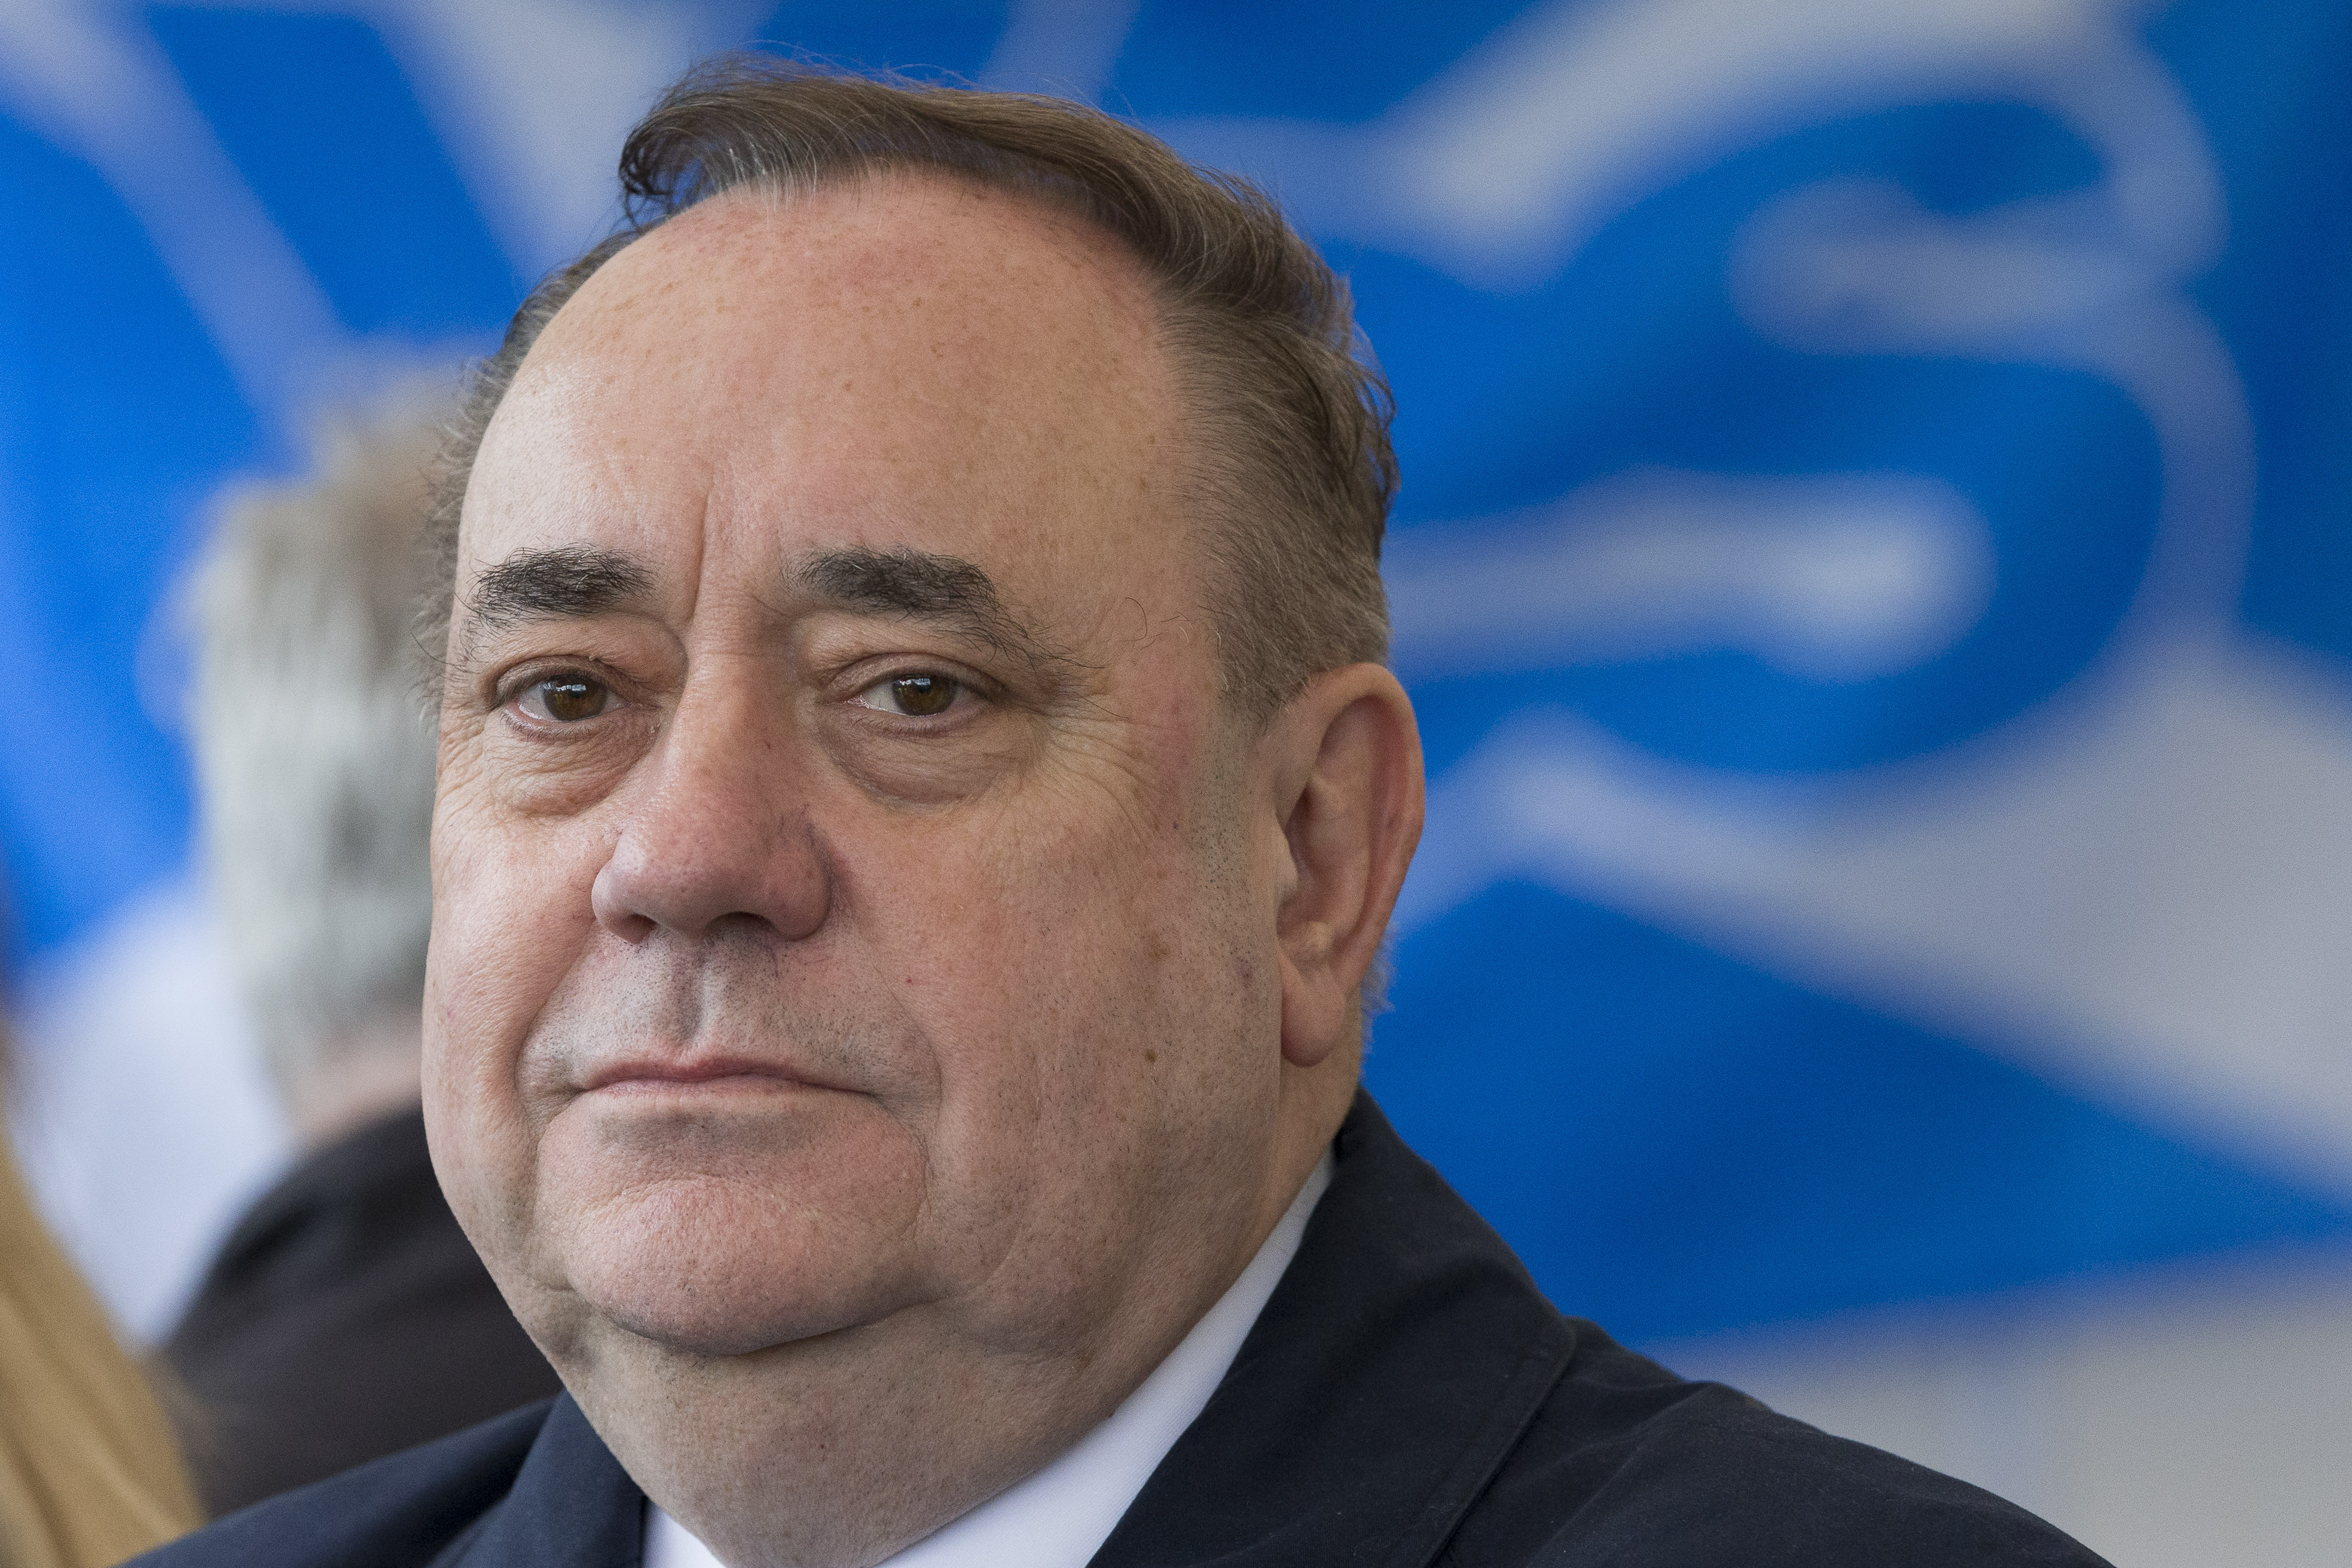 Alex Salmond disputed Nicola Sturgeon's claim that WhatsApp deletion was a long-standing Scottish Government policy.